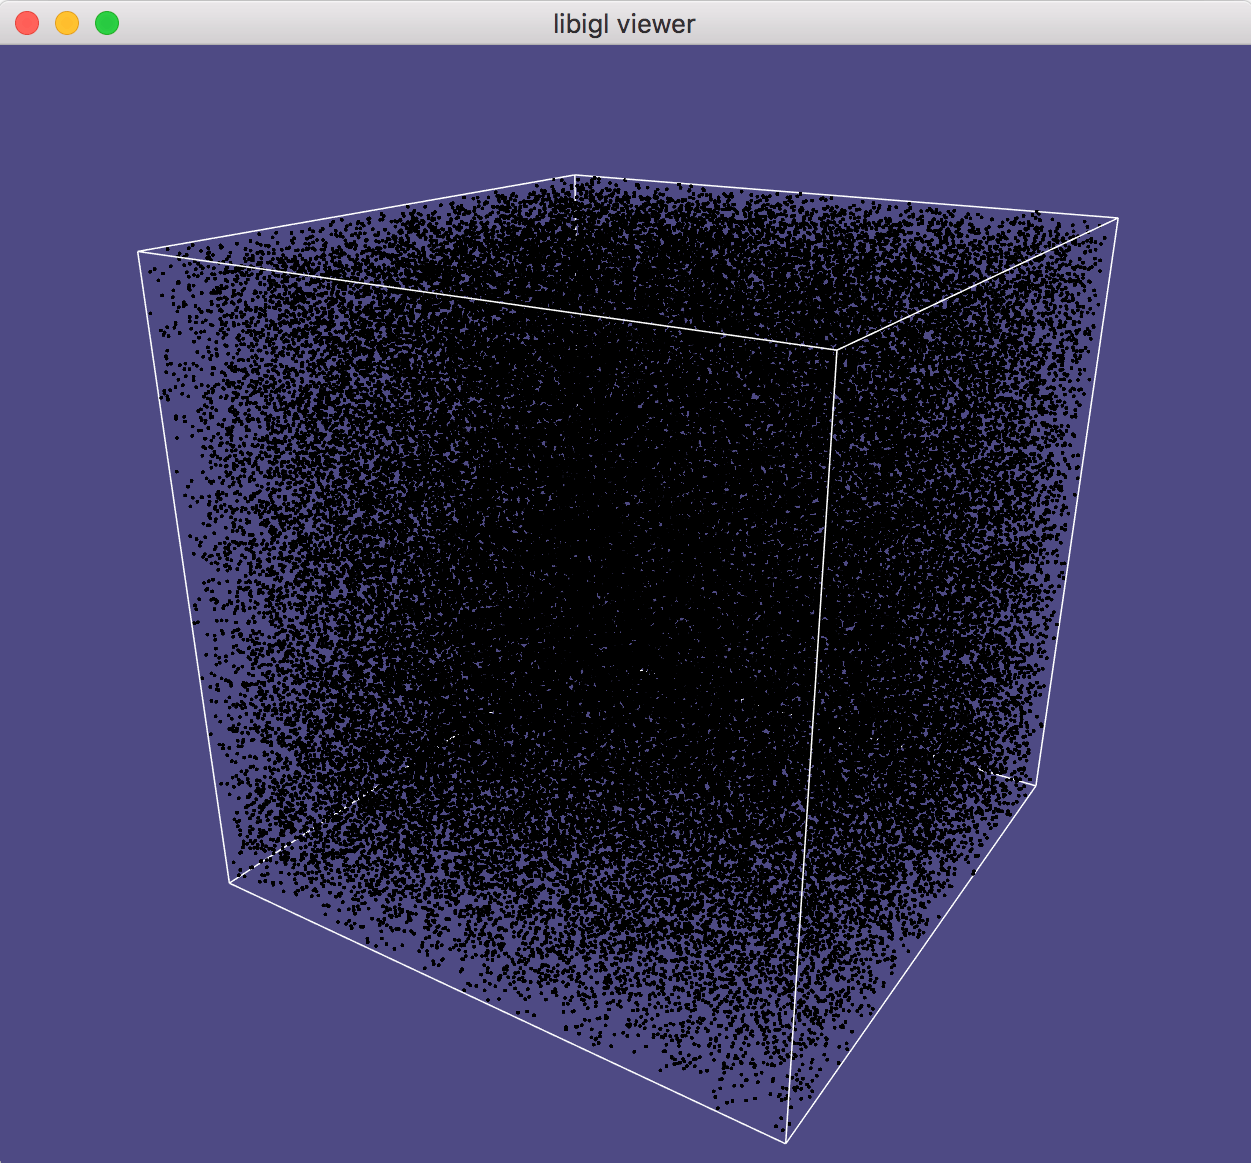 The AABB Tree around a point cloud starts with a single box. The next level has two boxes, roughly splitting the first box. This process continues recursively until there's only a single point in the box.